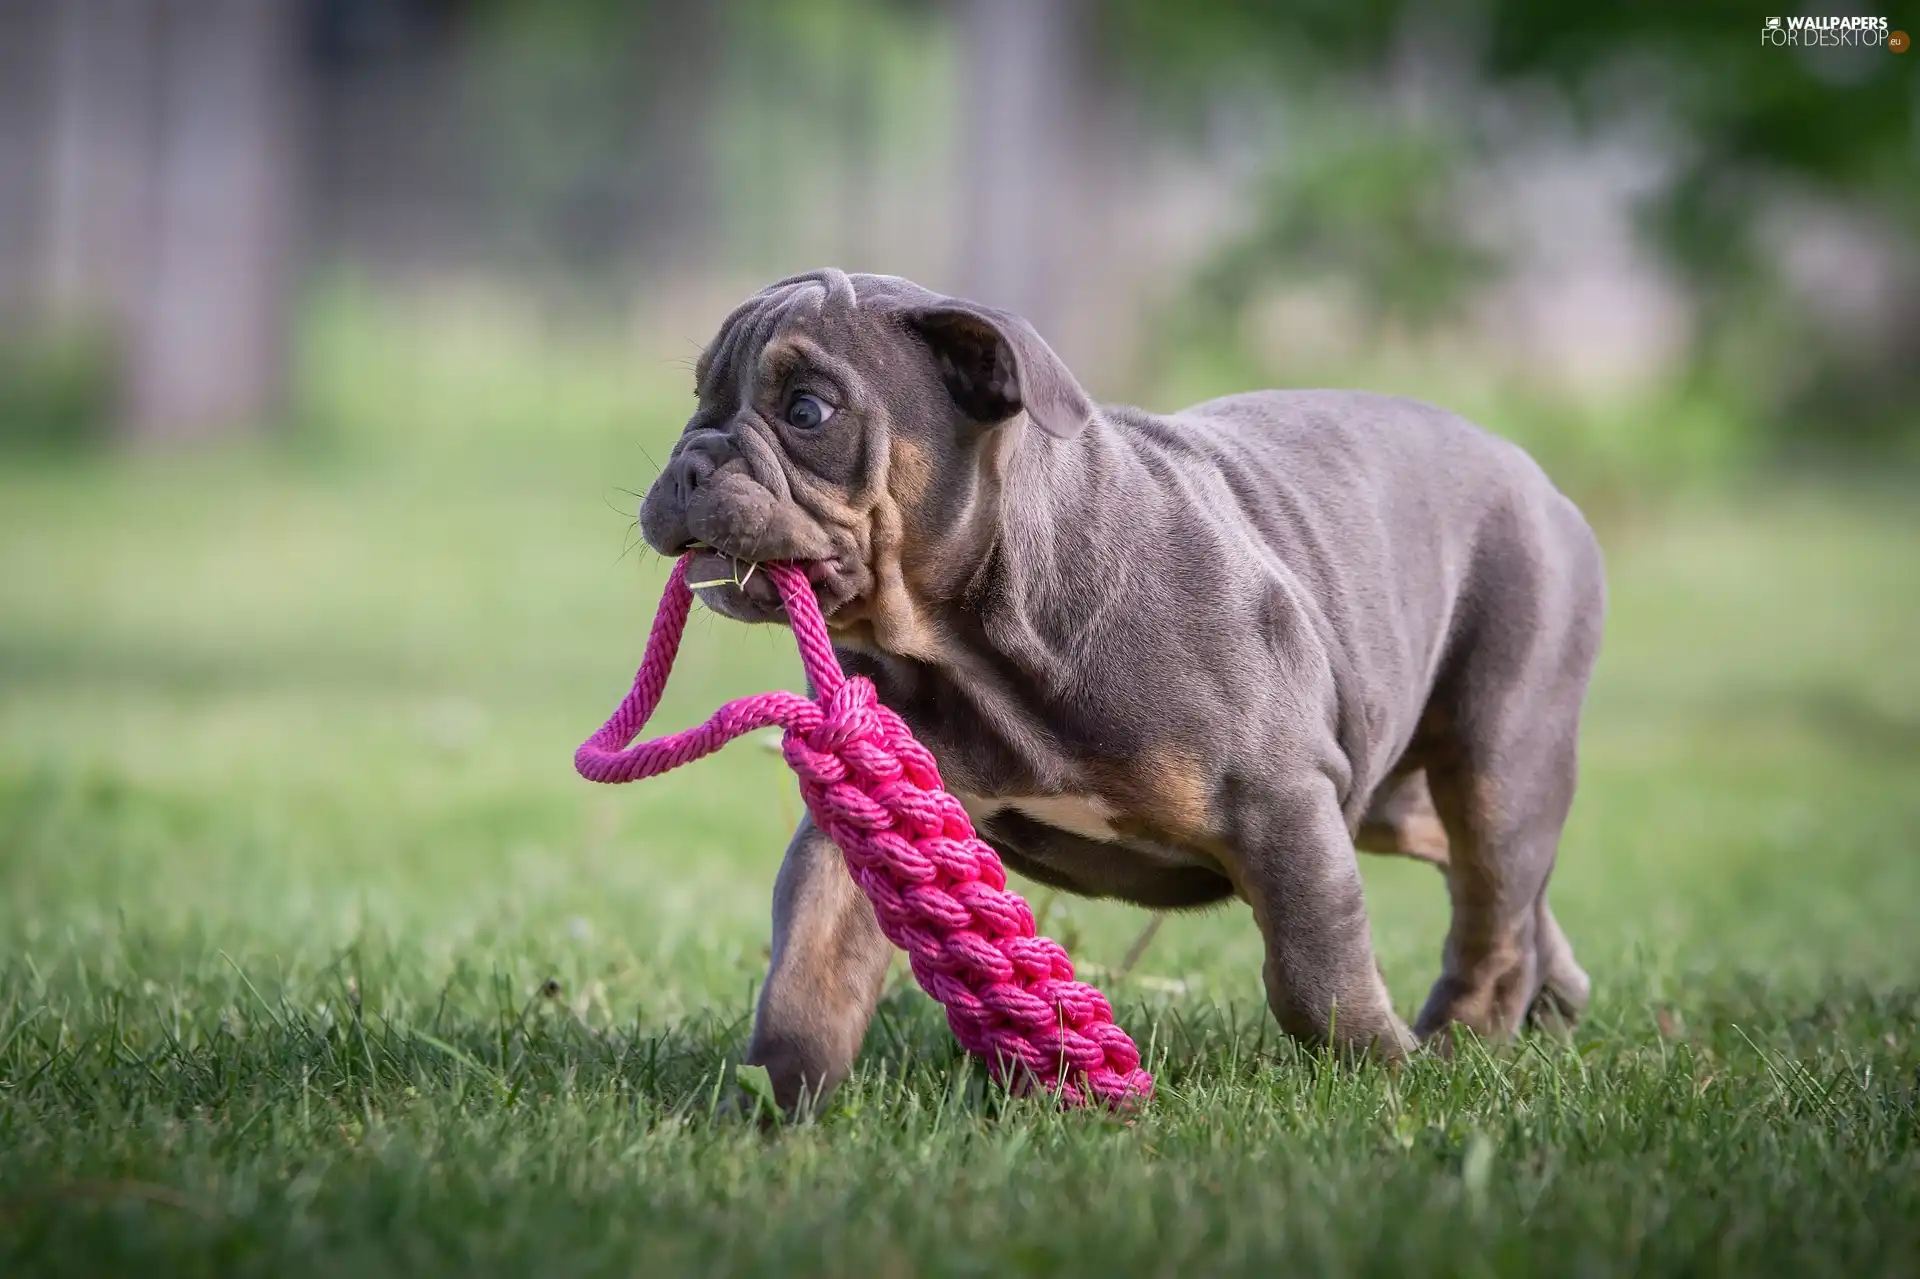 Teether, toy, Puppy, English Bulldog, dog - For desktop wallpapers ...